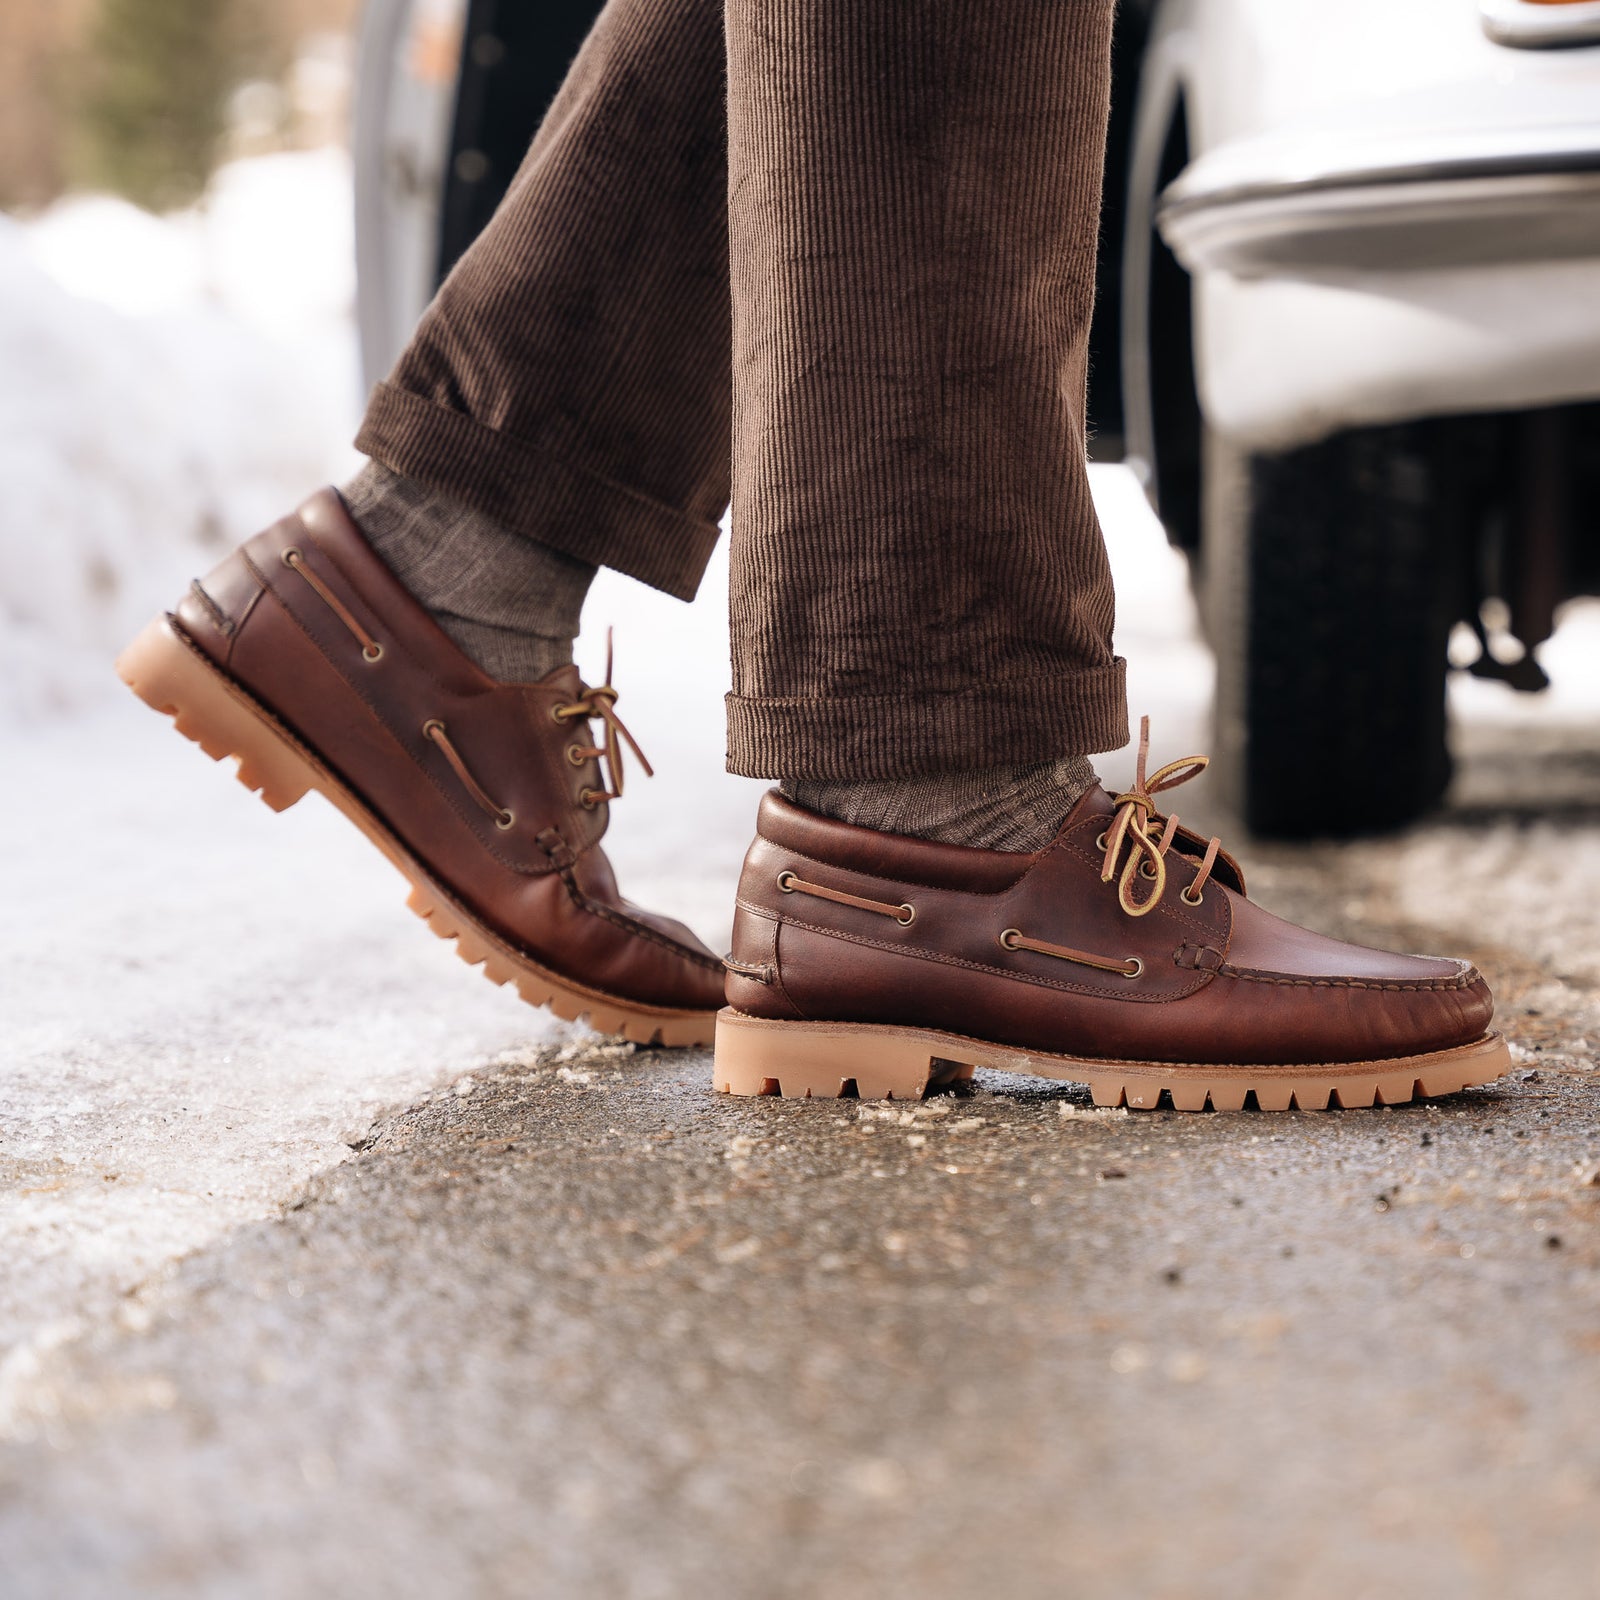 Men’s brown boat shoes with wool lining | Velasca